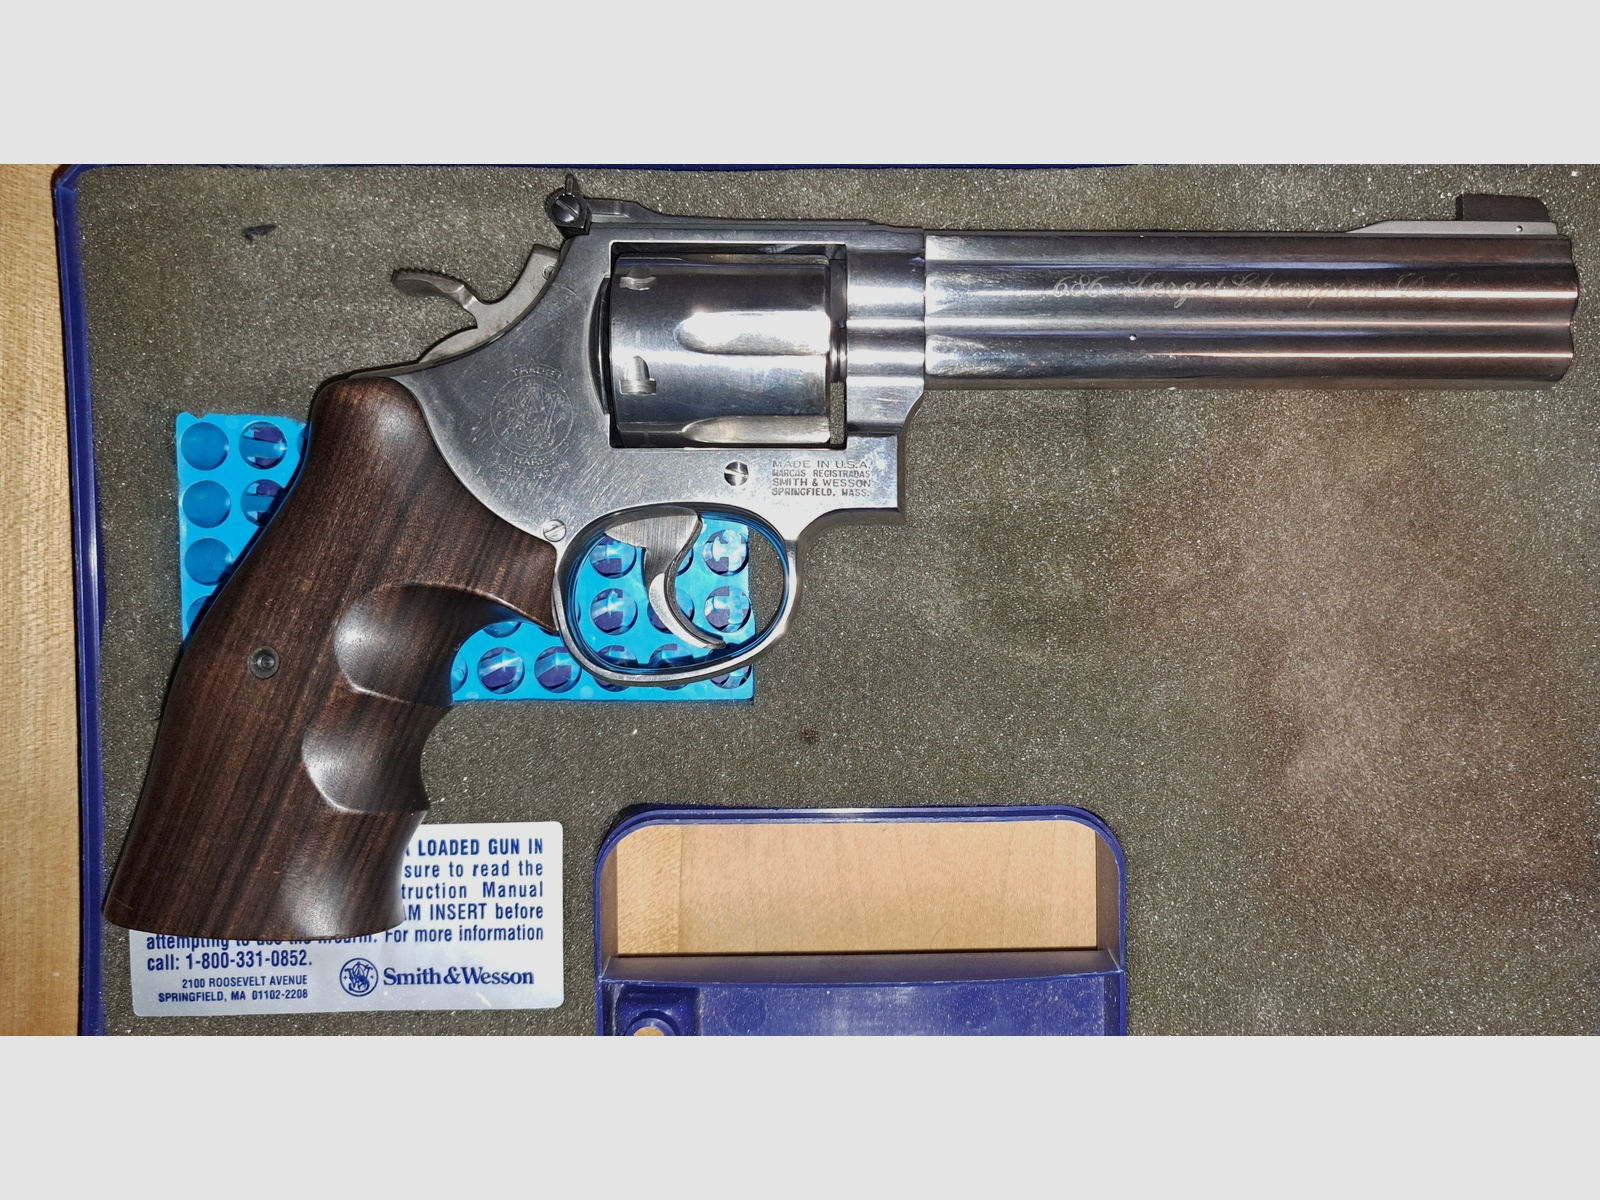 Smith & Wesson Revolver 686-4 Target Champion